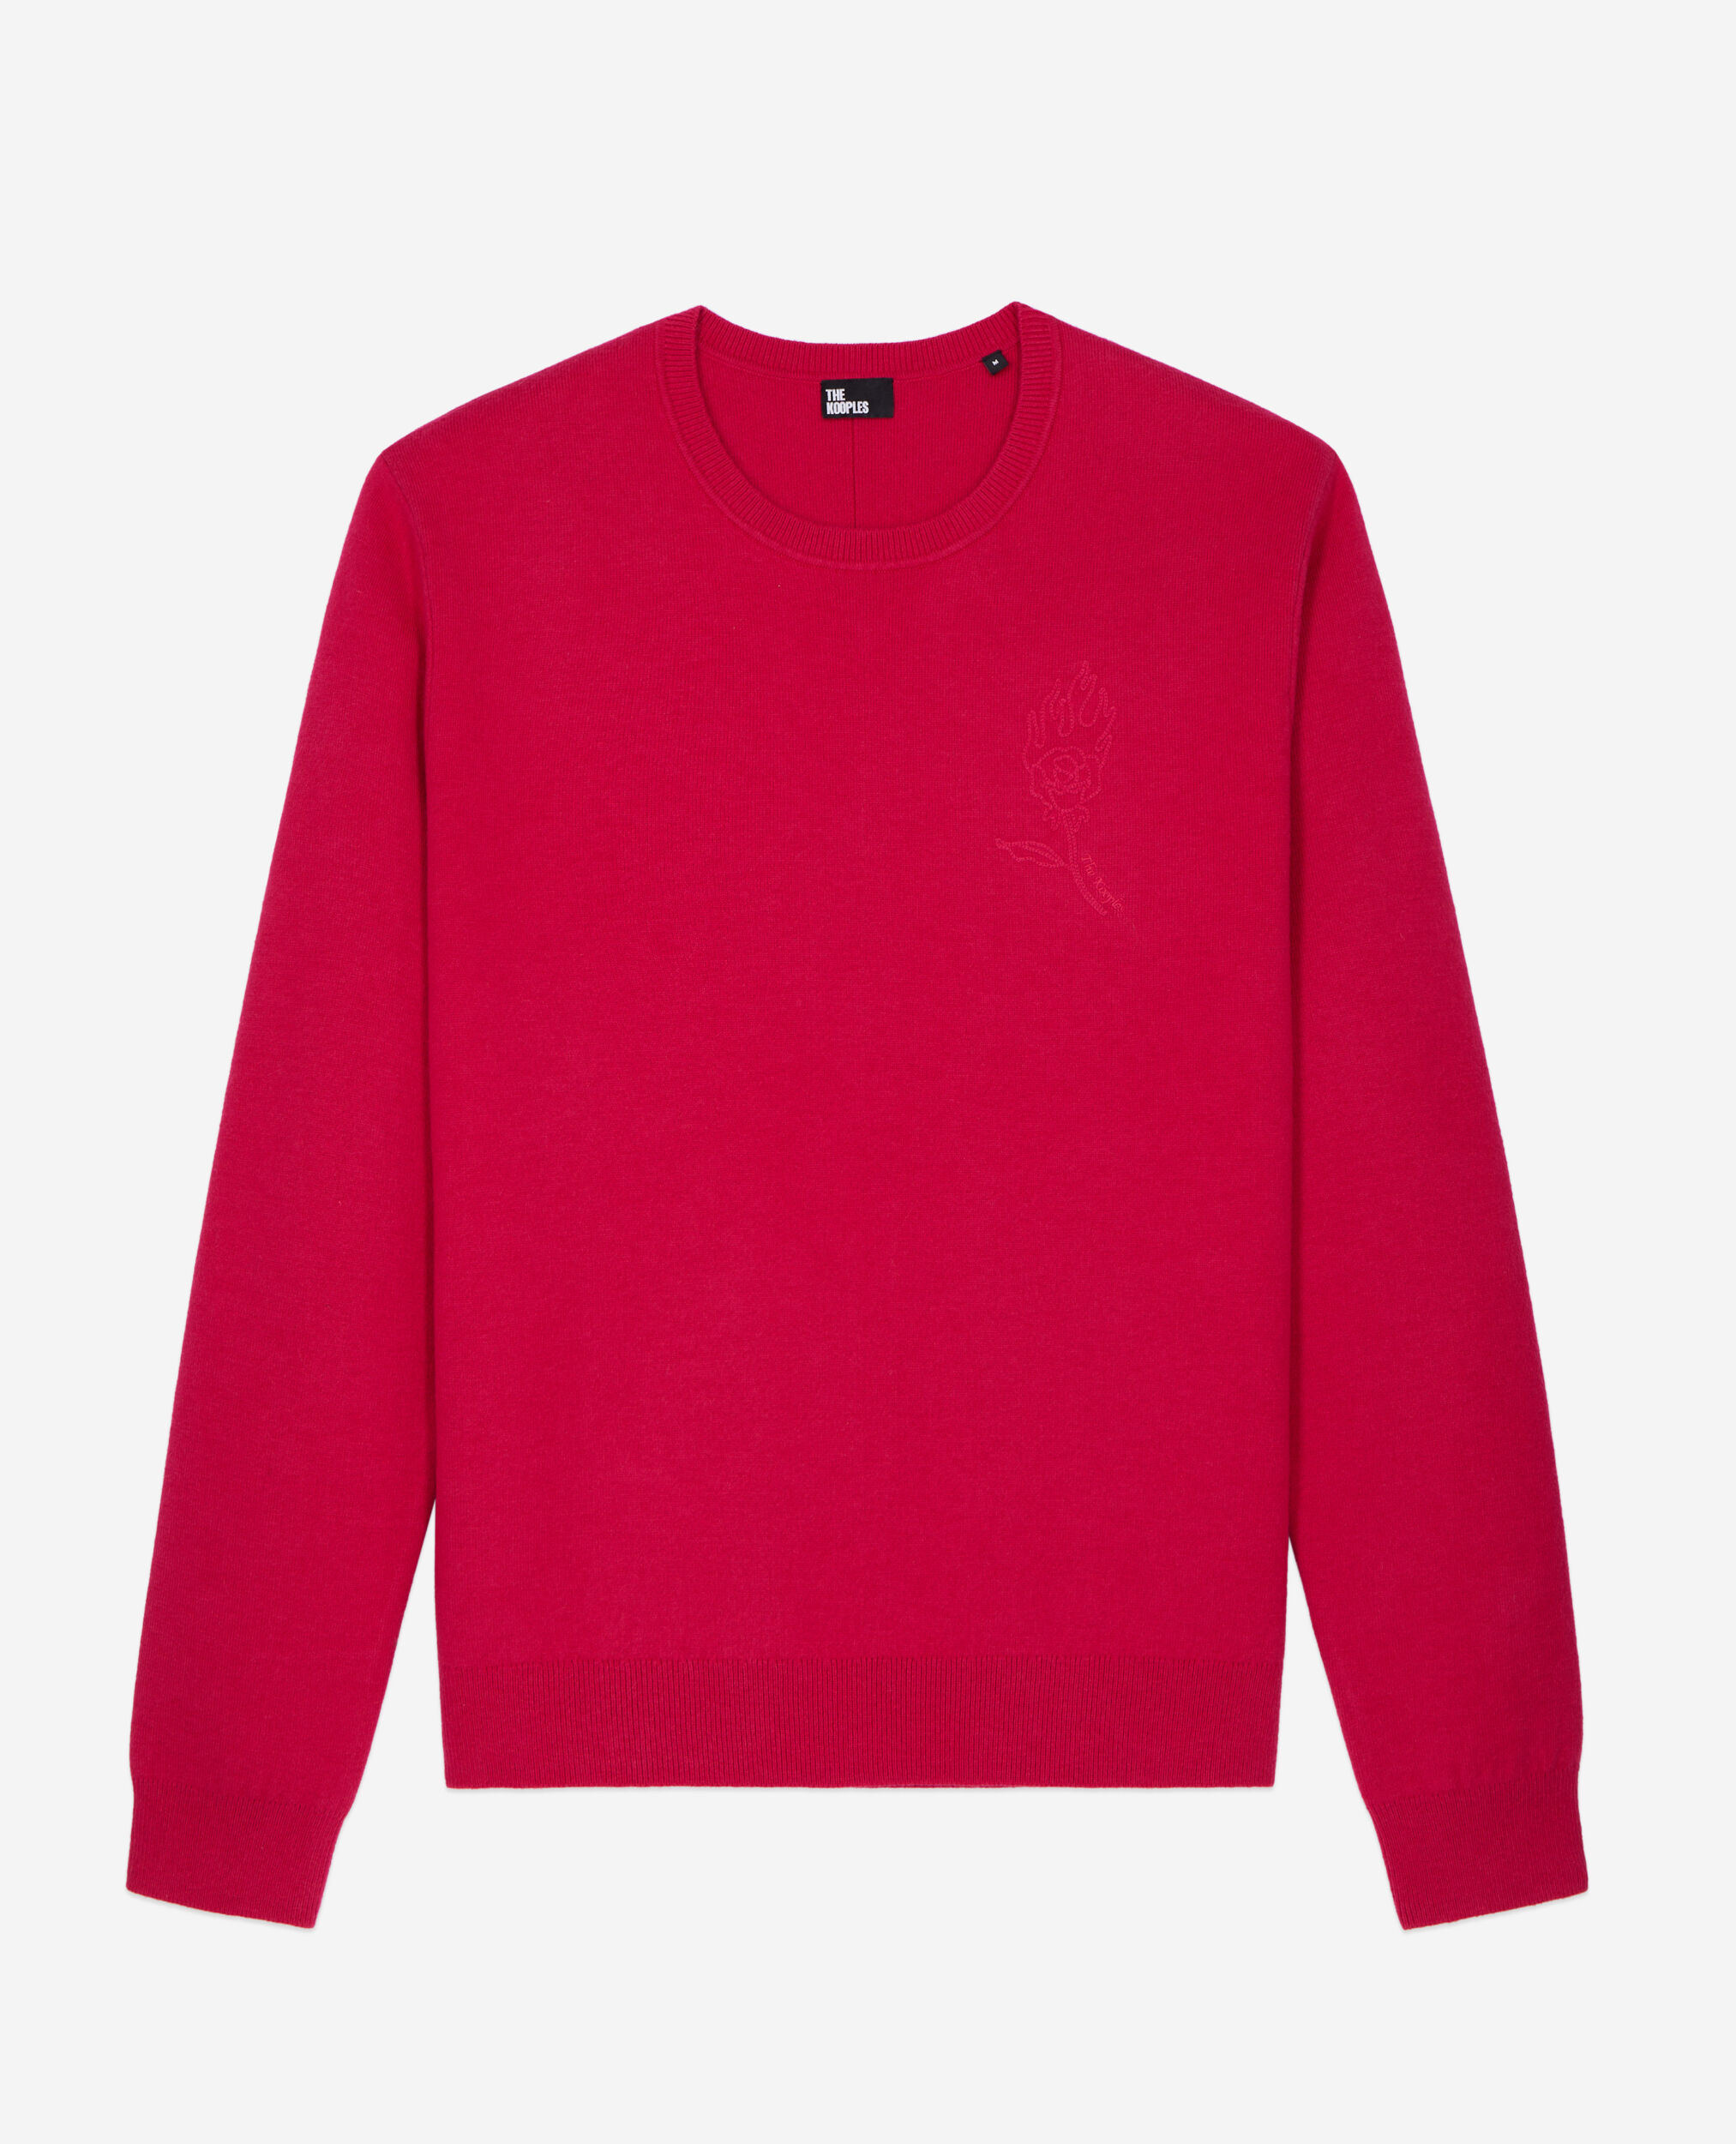 Red wool-blend sweater with embroidery, CHERRY, hi-res image number null